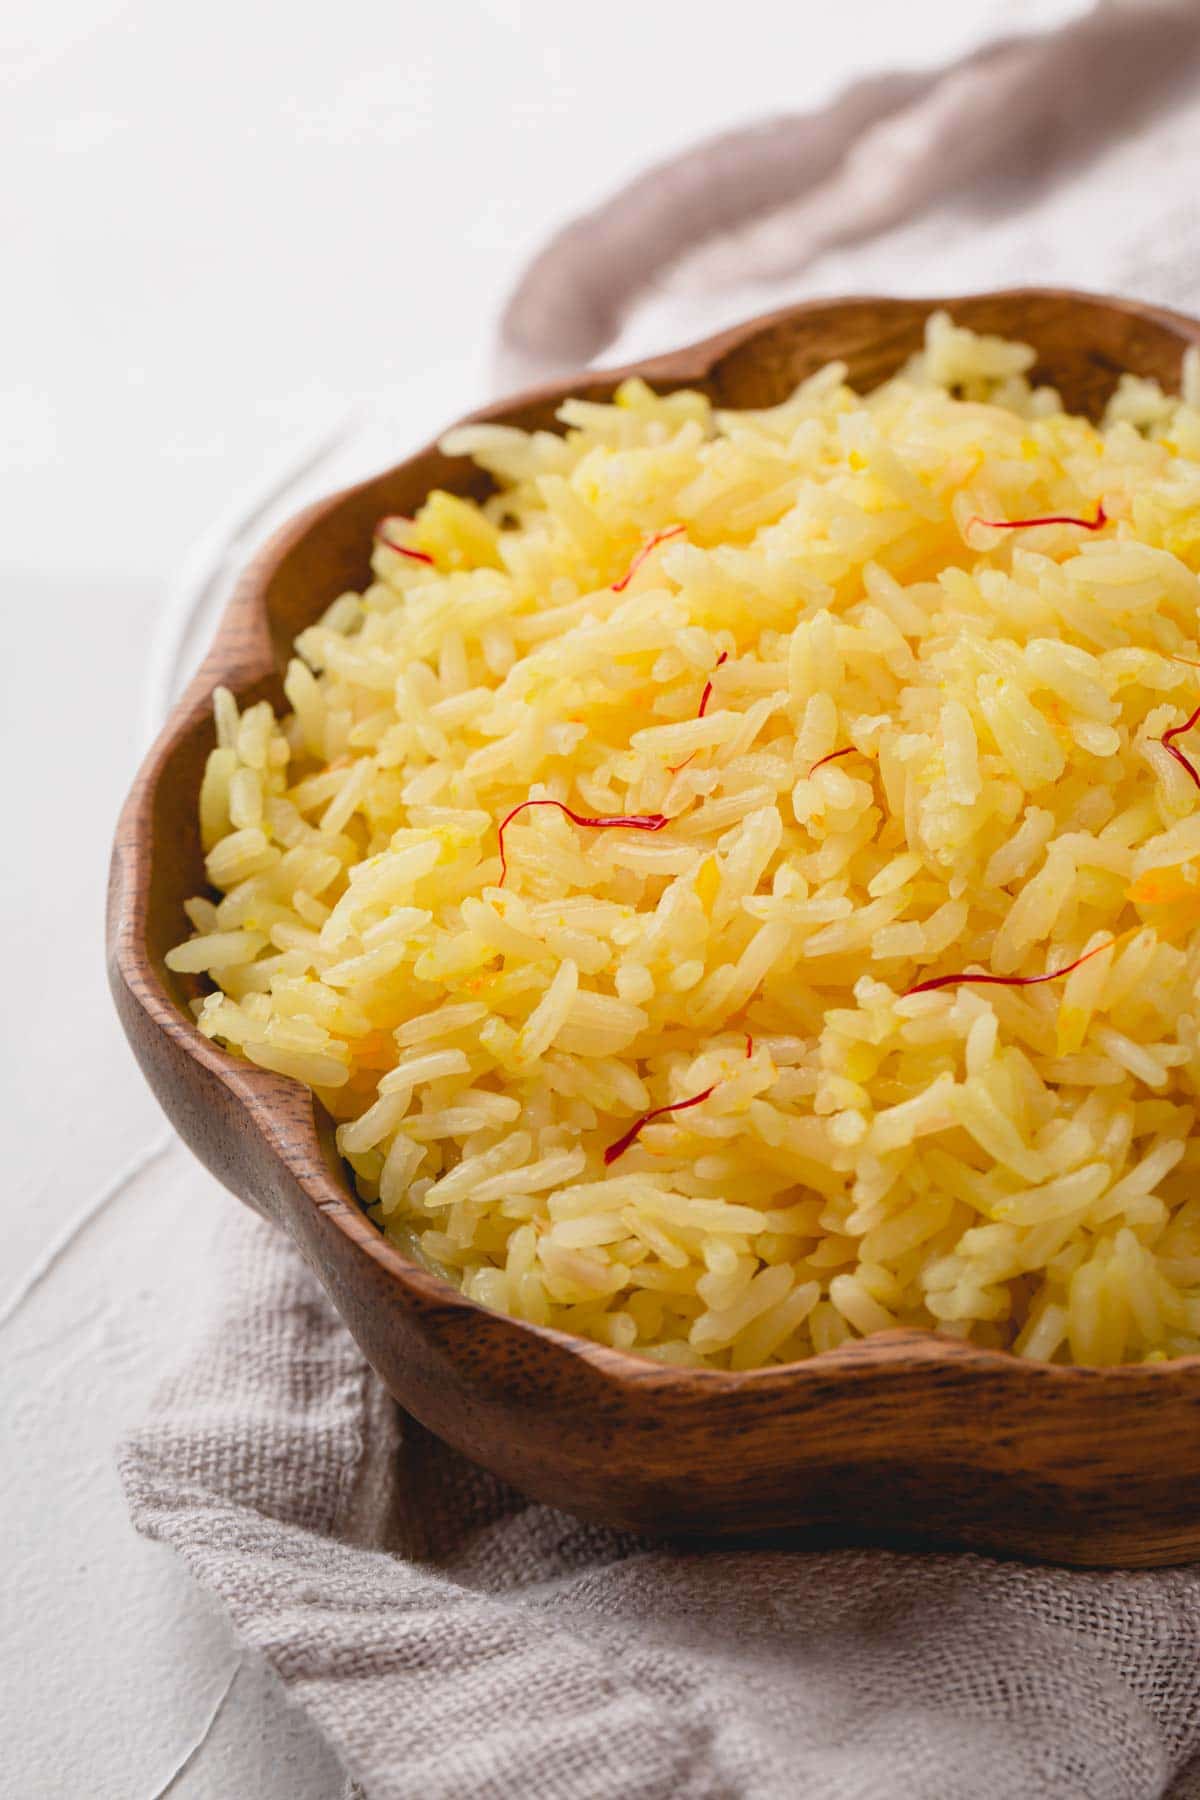 How to make: Braised rice with saffron